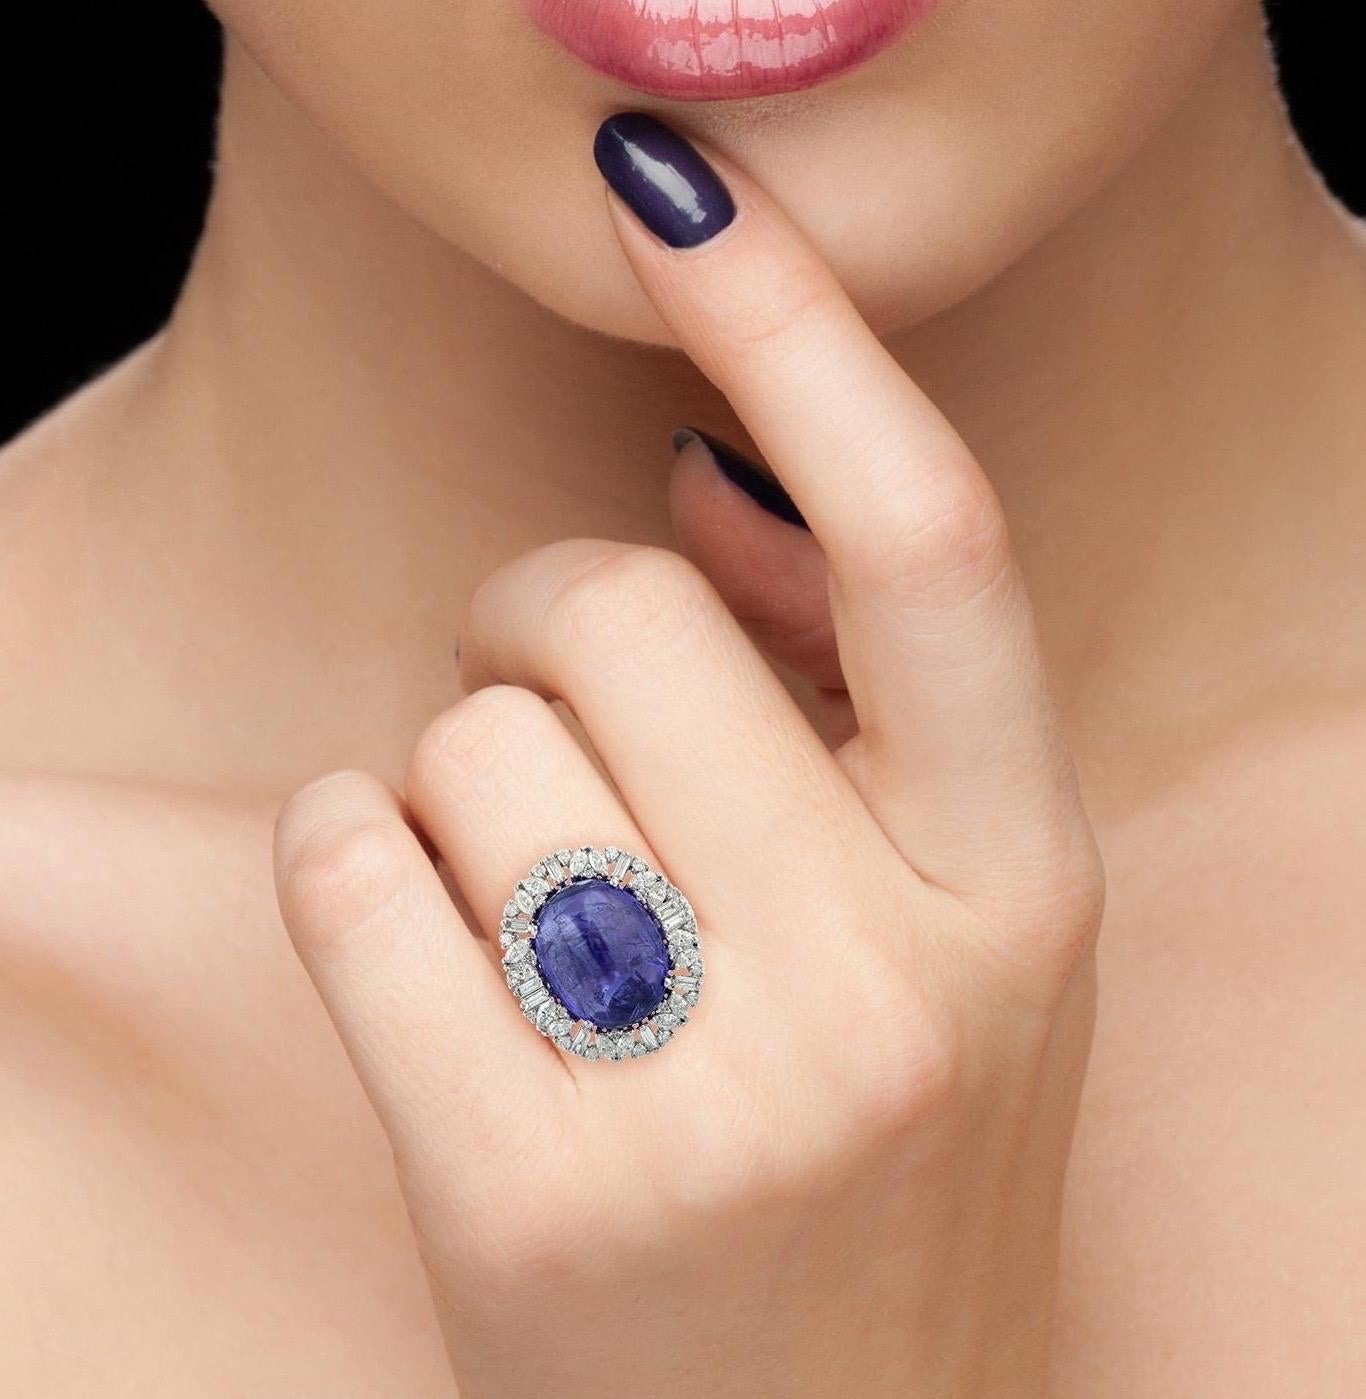 This stunning ring has been meticulously crafted from 14-karat white gold. It is centered with 20.0 carats tanzanite, illuminated with 1.77 carats of glittering diamonds. 

The ring is a size 7 and may be resized to larger or smaller upon request.